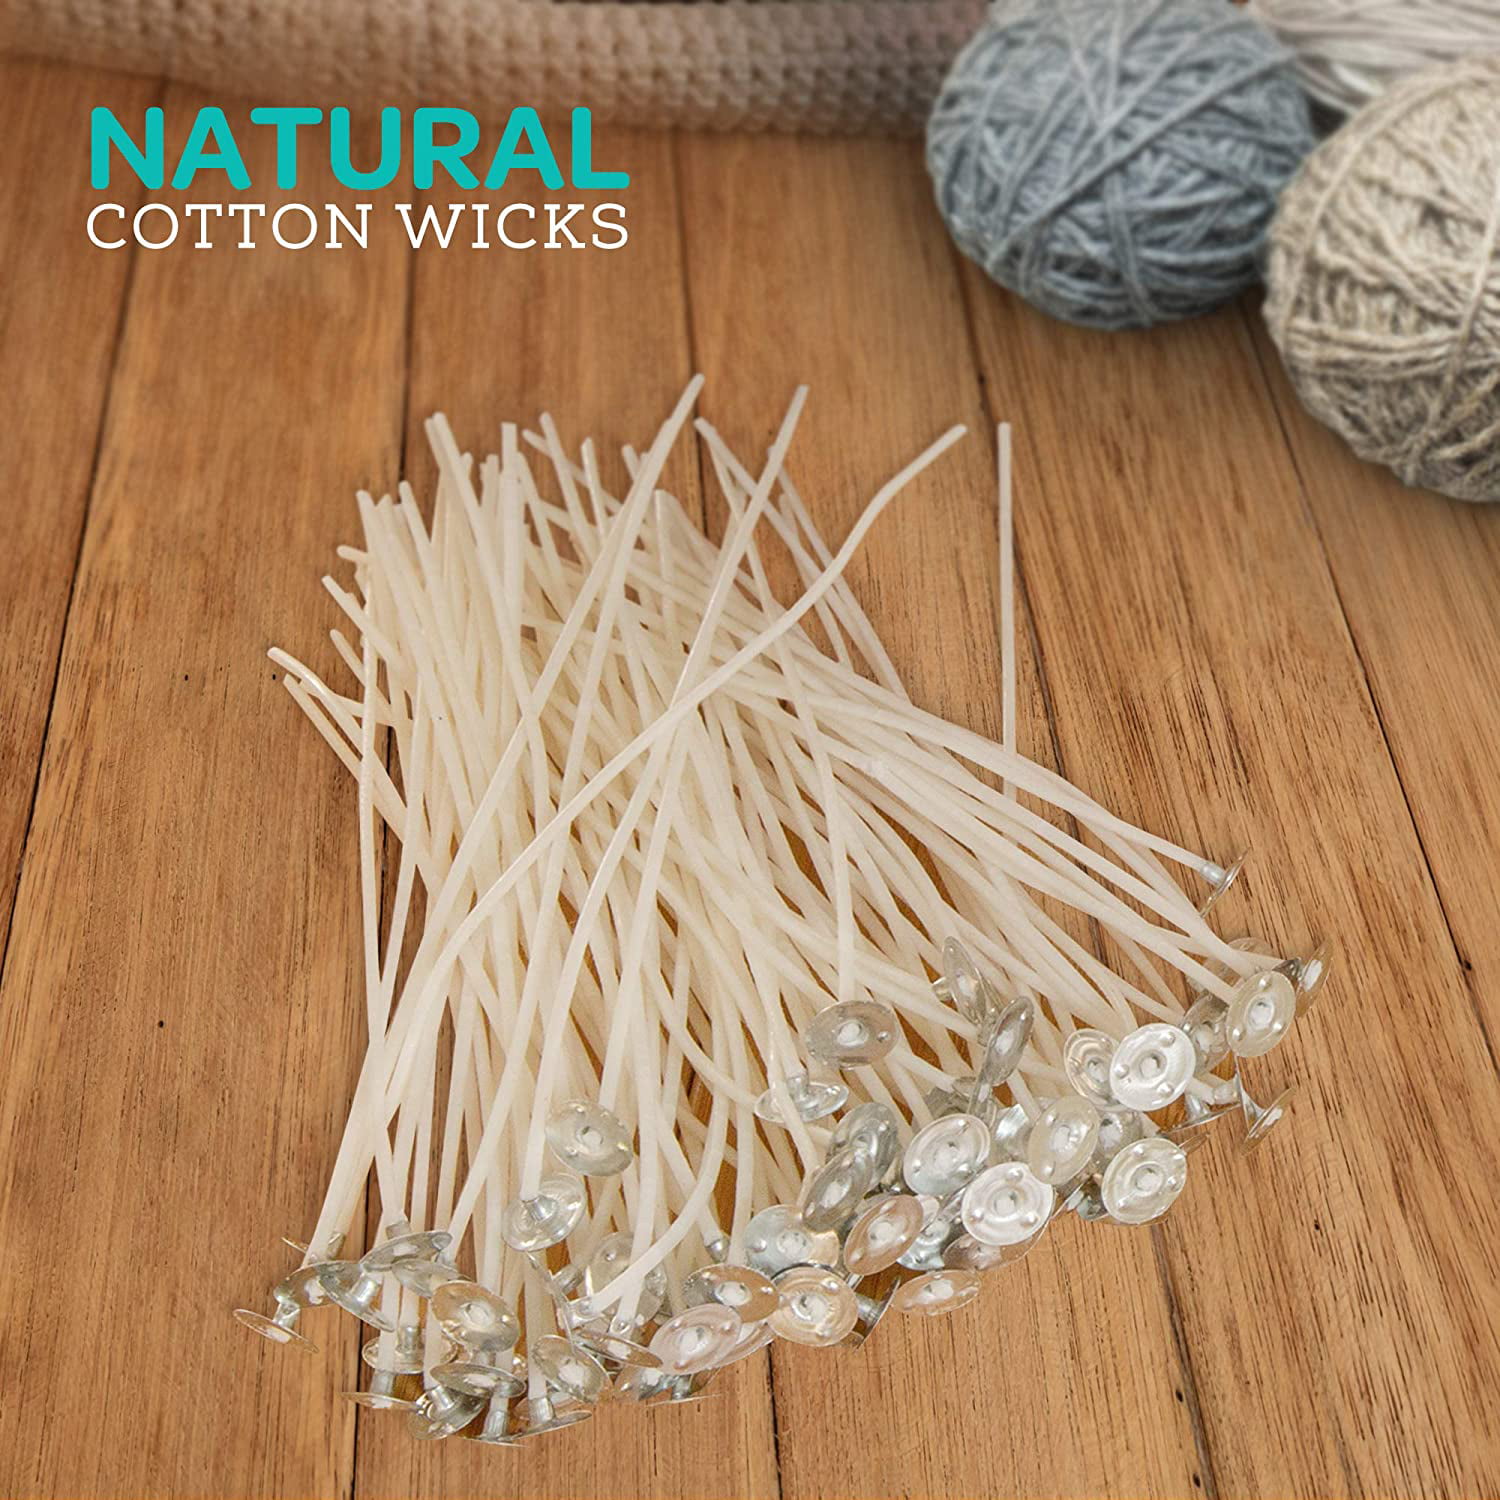 Hearts & Crafts Candle Wicks - 100% Natural Cotton, Pre-Waxed, Low Smoke 6 inch Wicks for DIY Candle Making, 100 Wicks Plus 2 Centering Devices